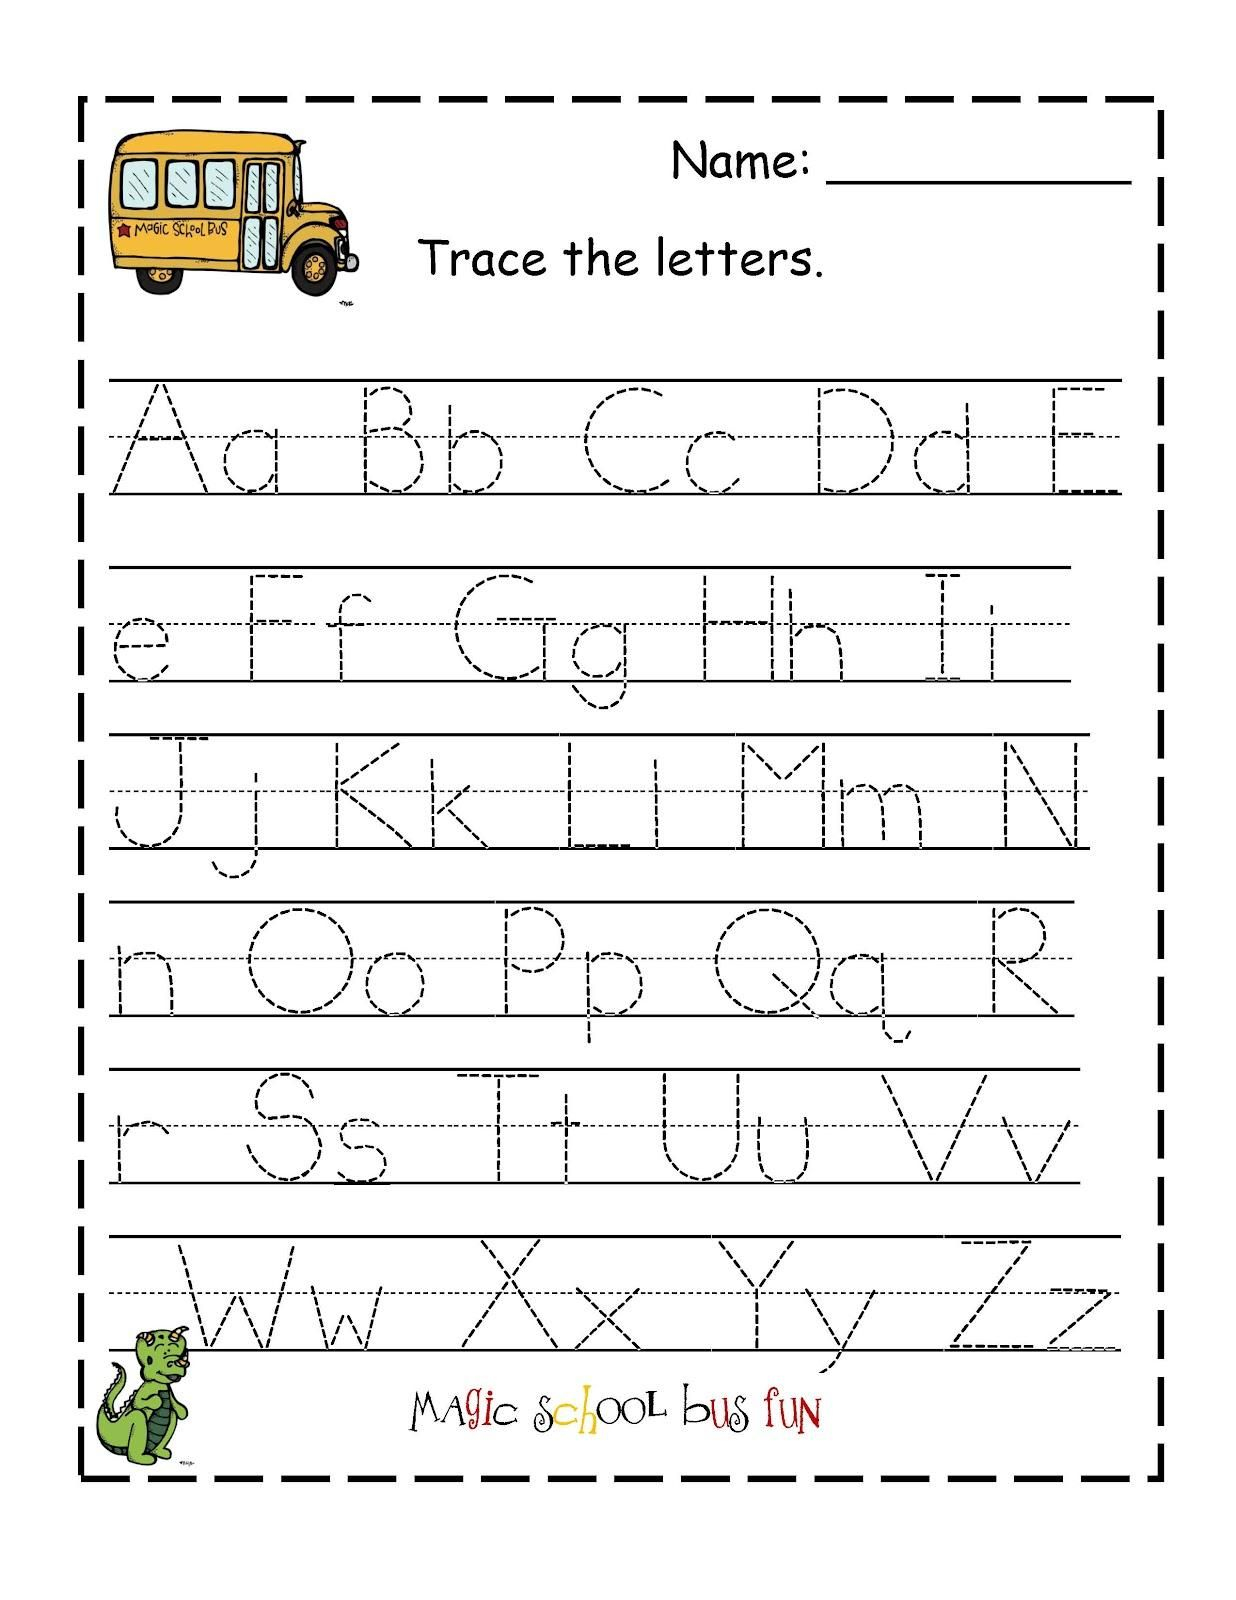 Free Printable Abc Tracing Worksheets #2 | Handwriting within Alphabet Tracing Worksheets Pdf Download